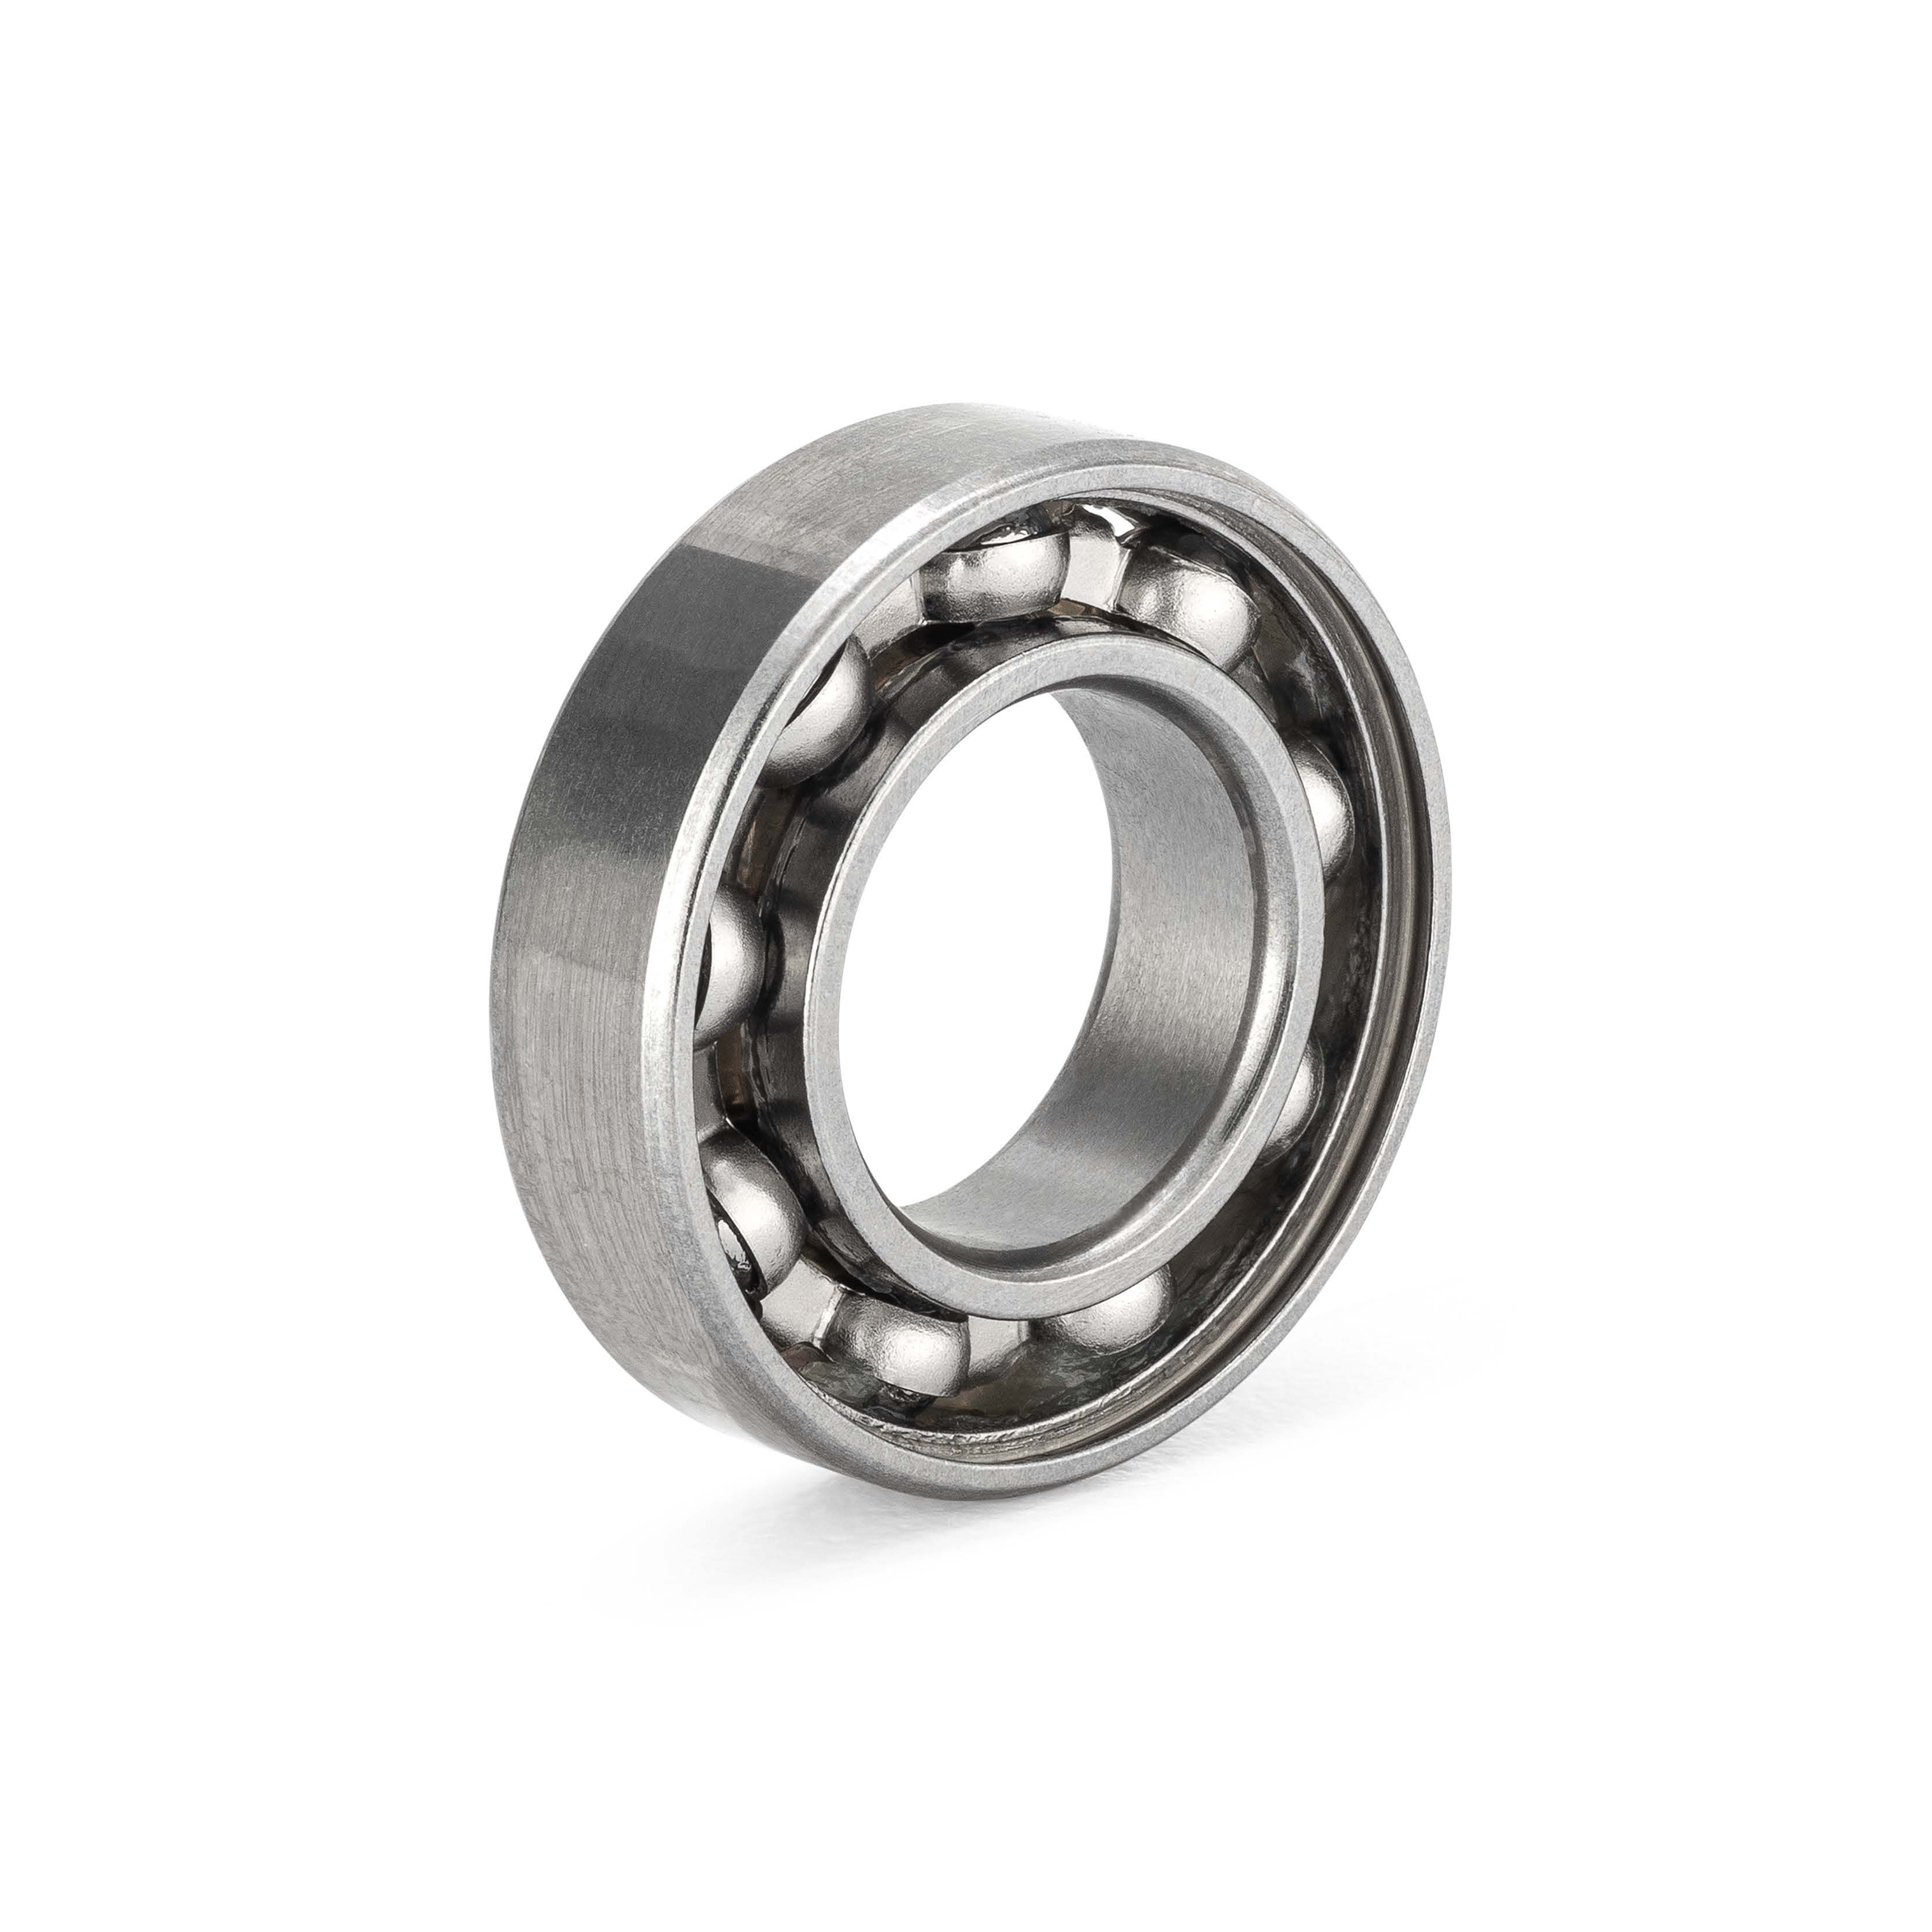 A DDL-850 HA3 P25 LO1 bearing bearing on a white background.